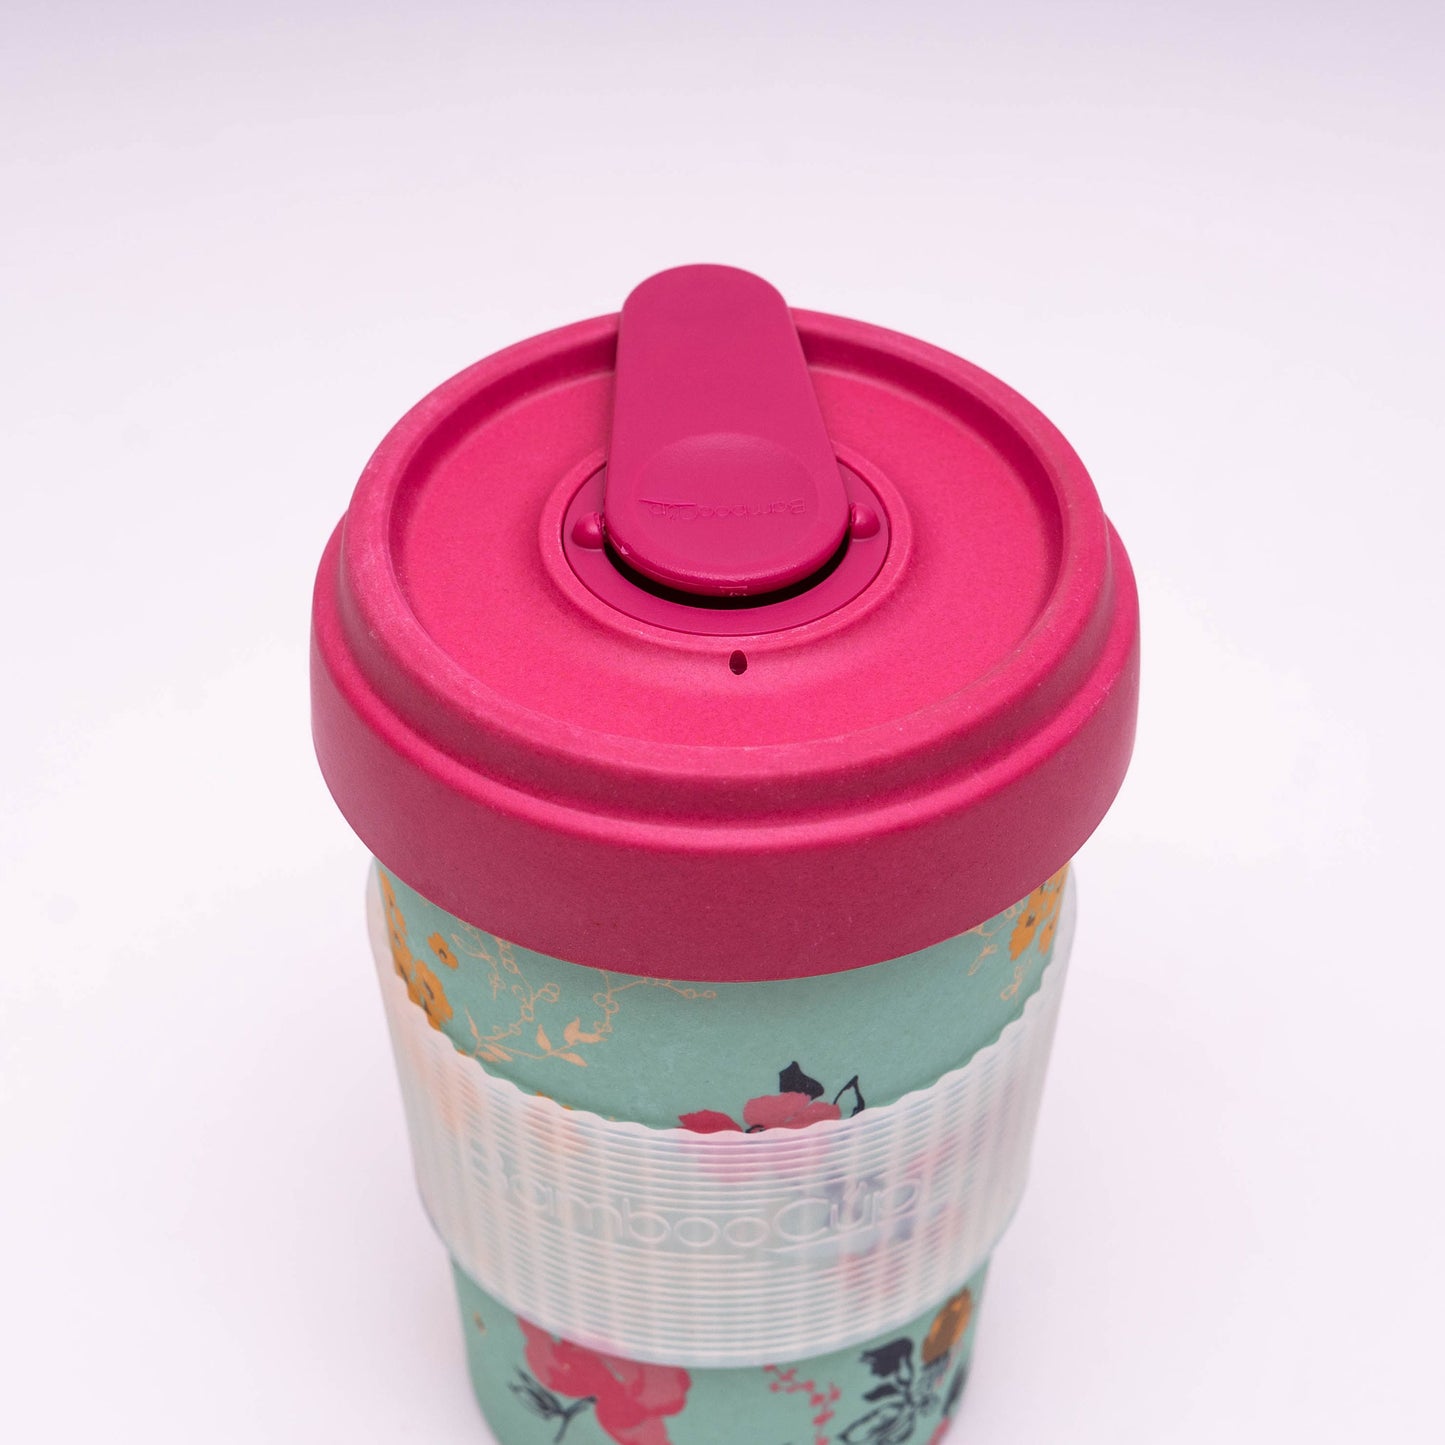 Flower Blossom 400ml Eco friendly Bamboo Mug with Silicon Grip